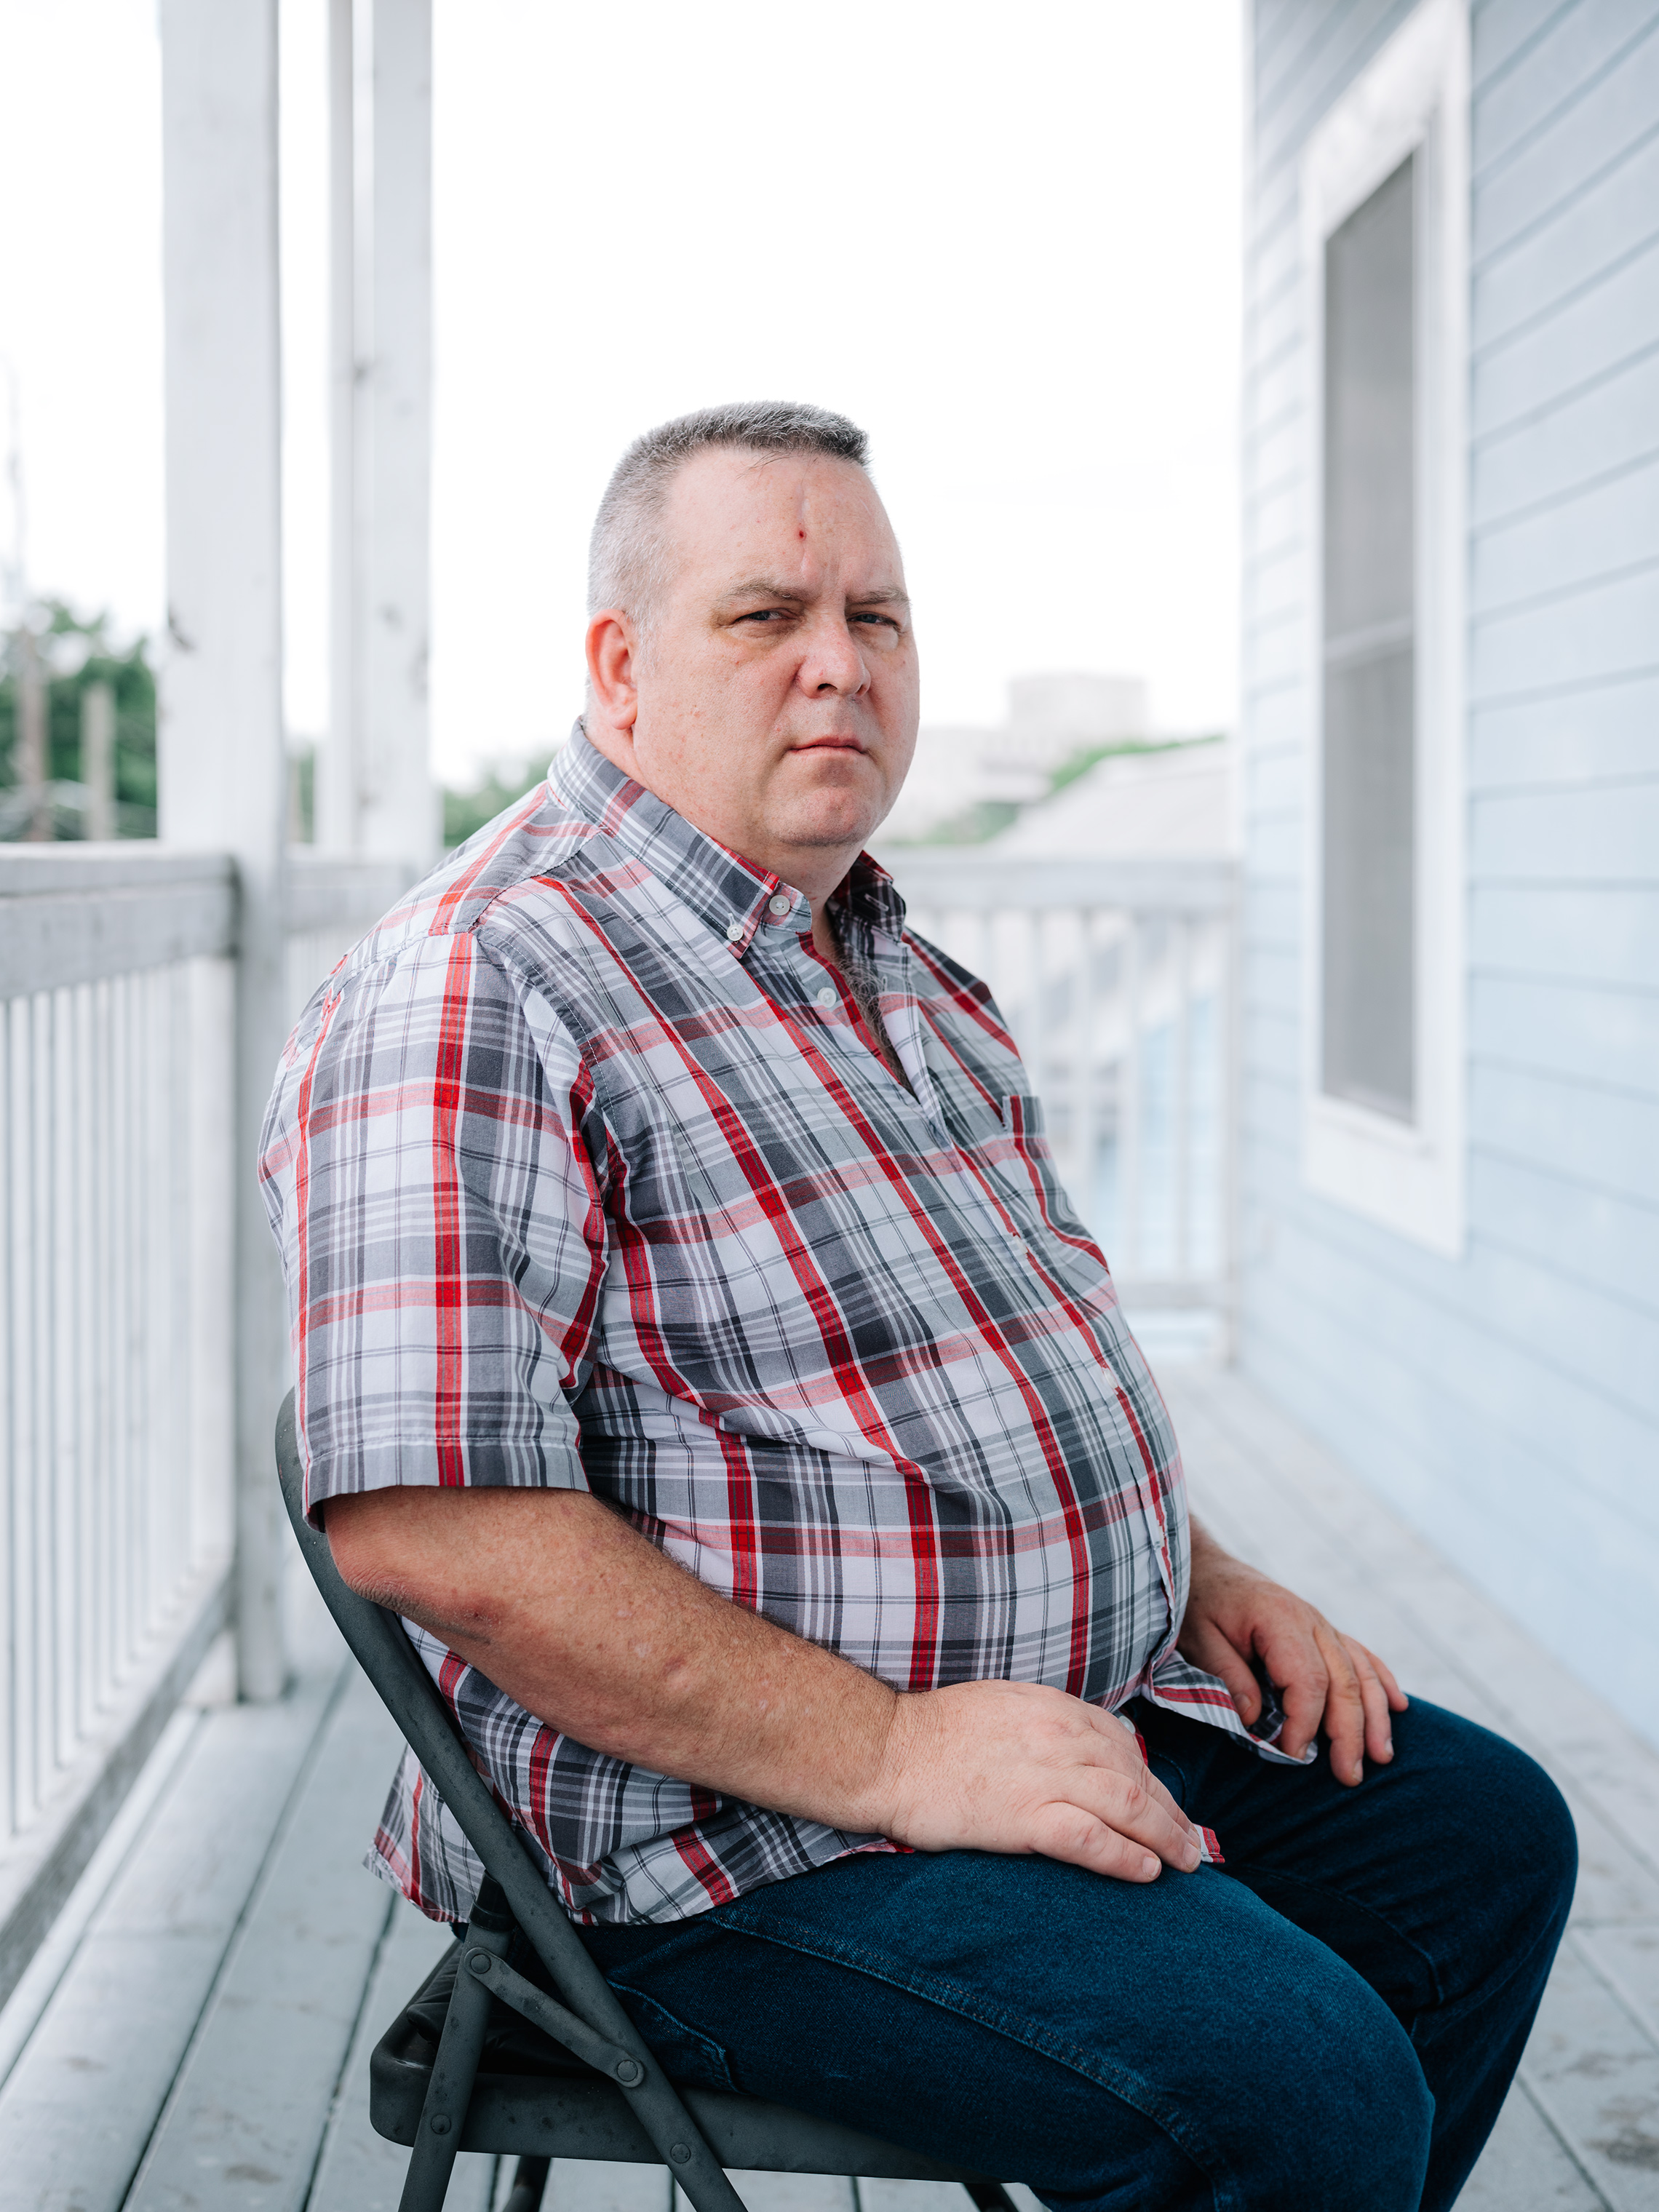 James Kretschmer, 56, was abused by his Scoutmaster for a period of four to six months. “I’ve been married and divorced four times. And I will stand up and say right now it’s probably because of the simple fact that I built a shell to protect myself because of the trauma,” he says. (David Kasnic for TIME)